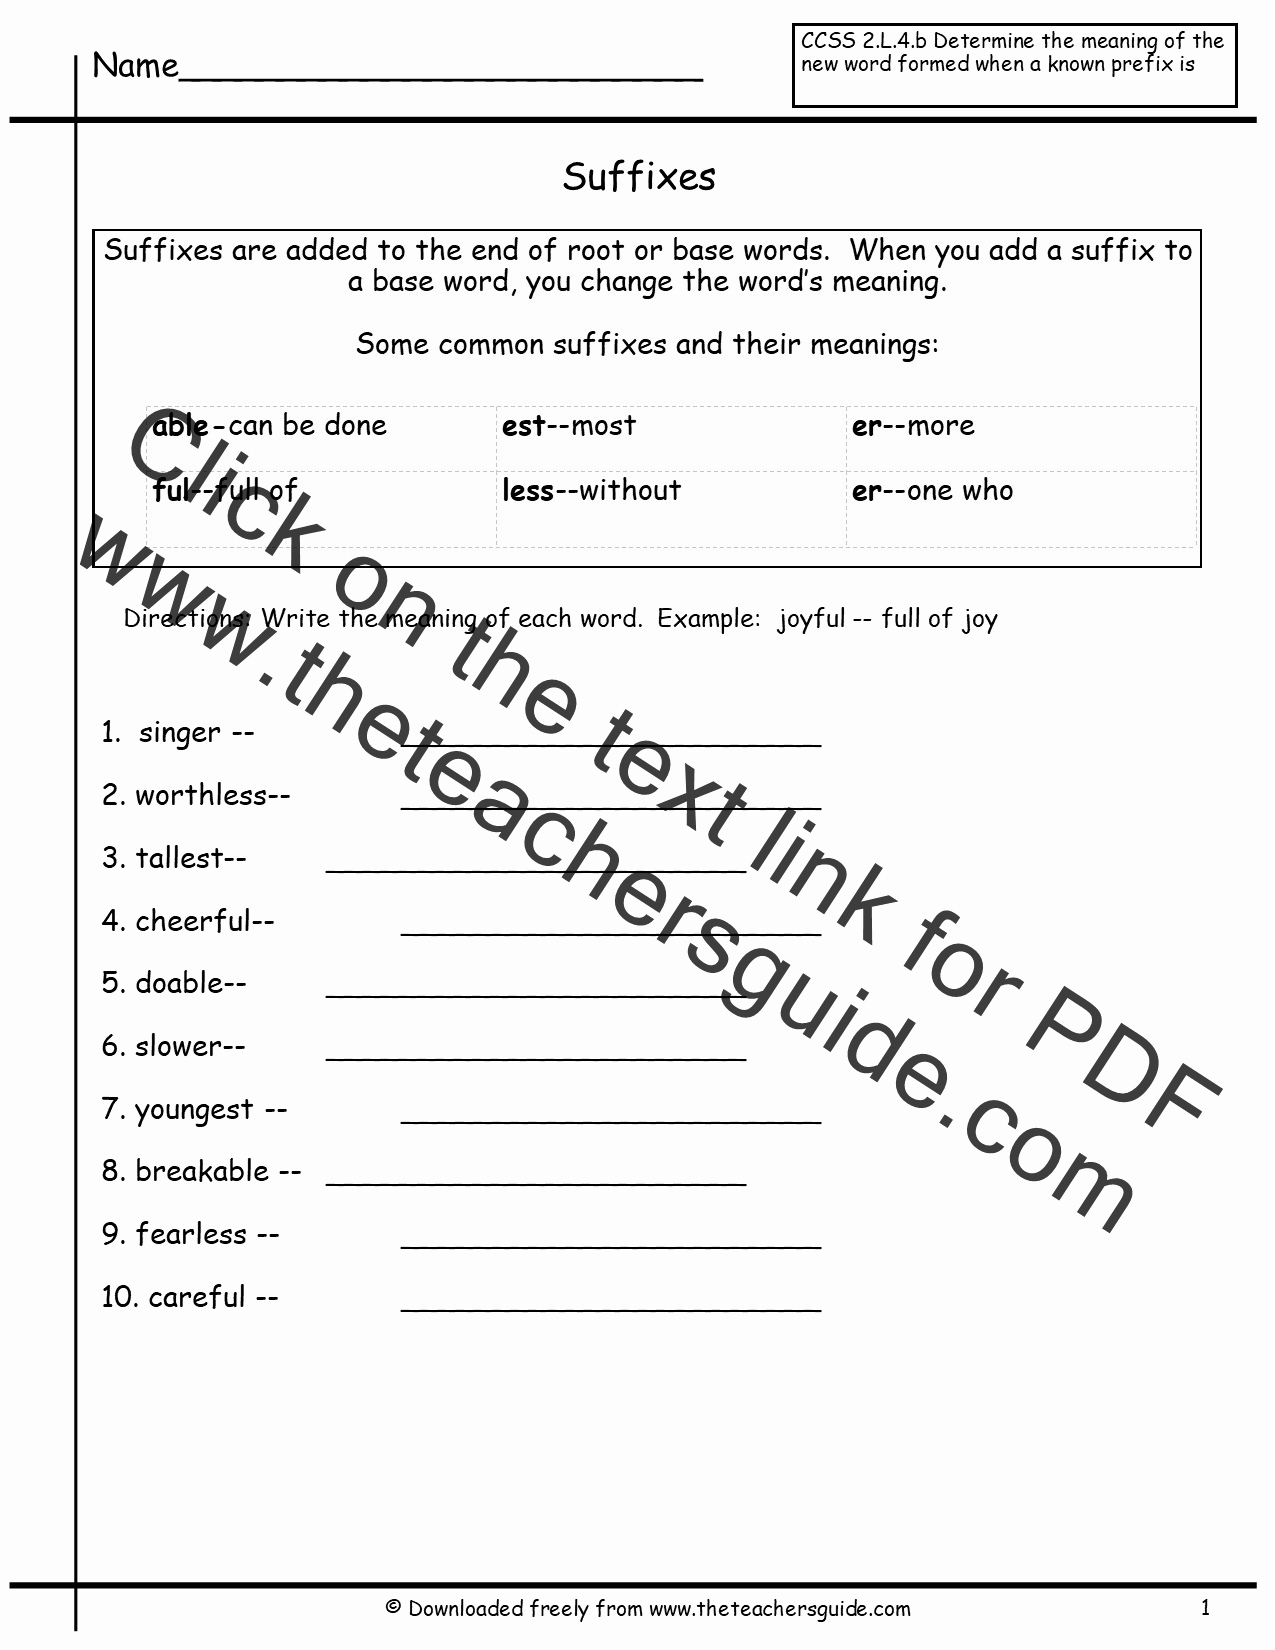 Free Suffix Worksheet New Free Prefixes and Suffixes Worksheets From the Teacher S Guide